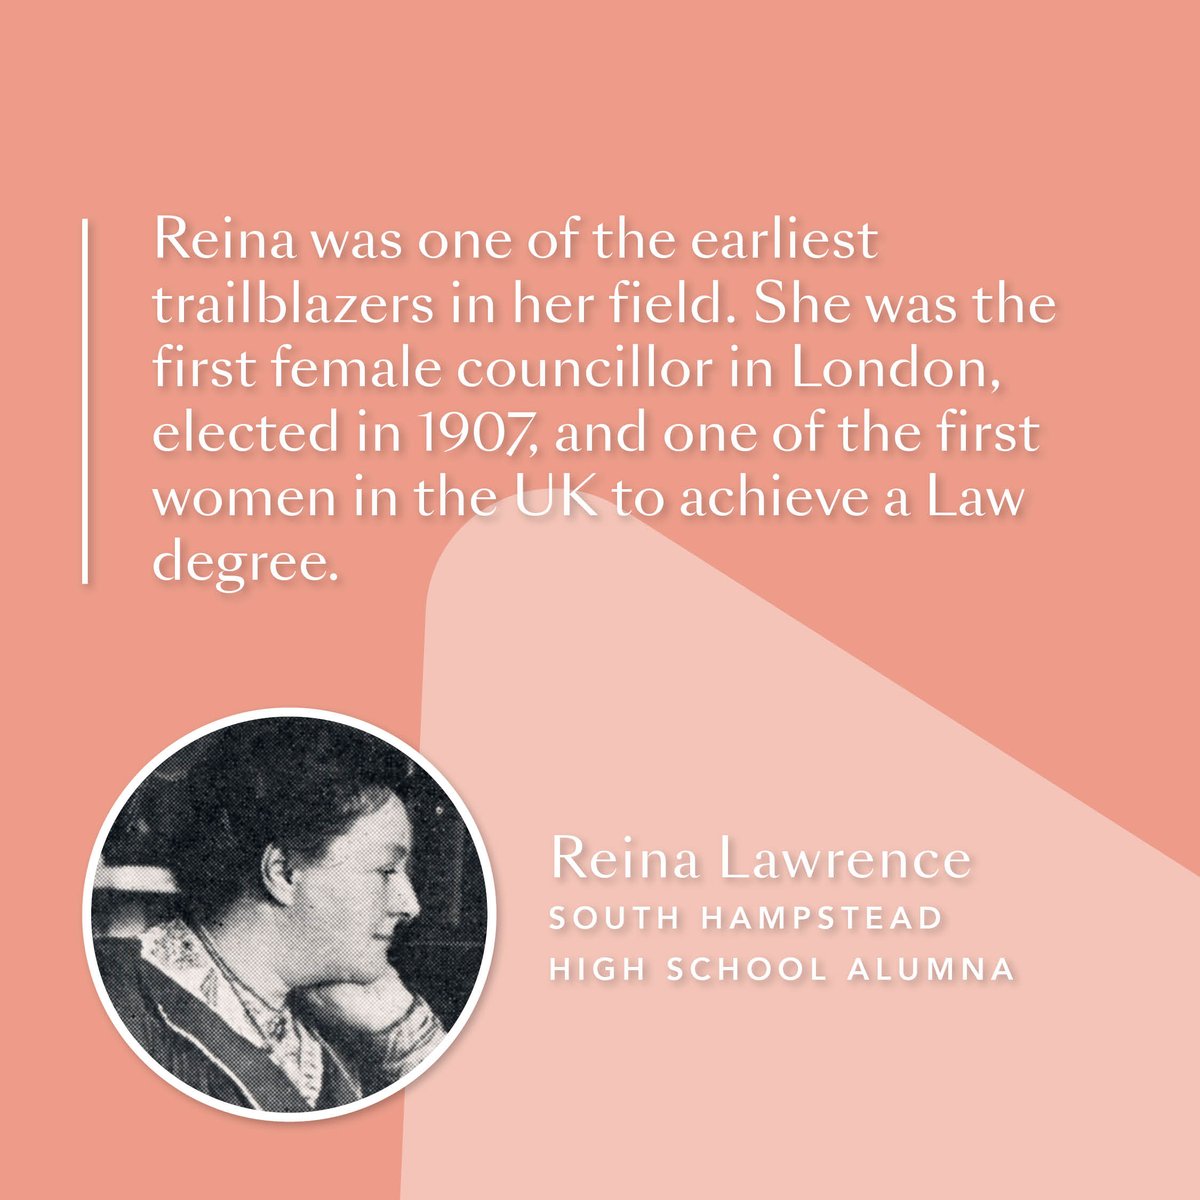 Reflecting on the legacy of one of our trailblazing alumnae. #throwbackthursday